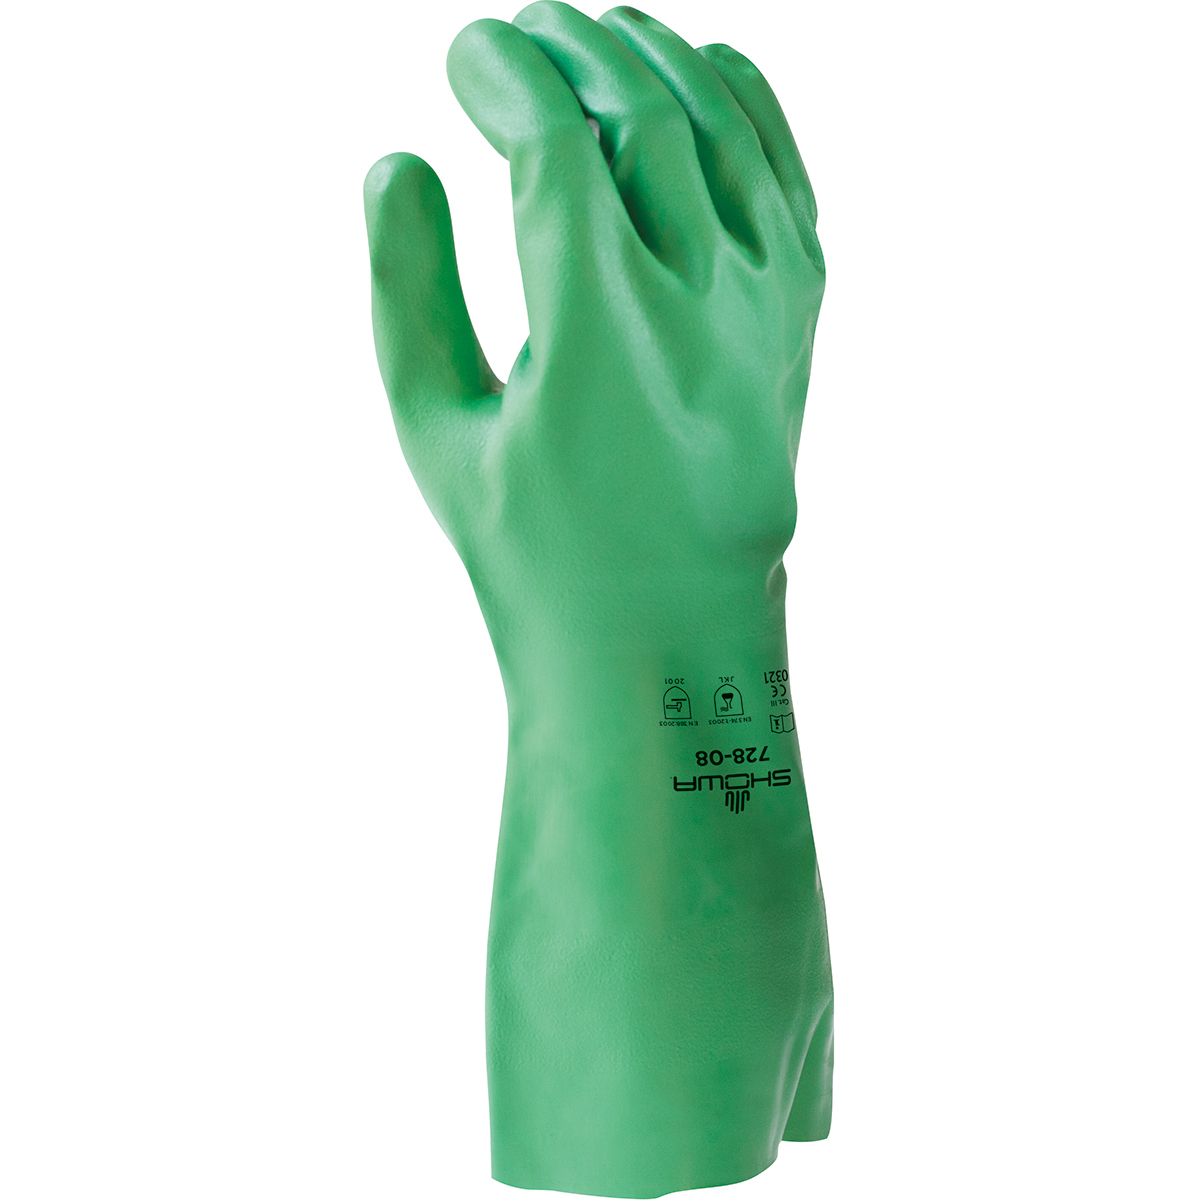 SHOWA® Green Cotton Flocked Lined 15 mil Unsupported Biodegradable Nitrile Chemical Resistant Gloves